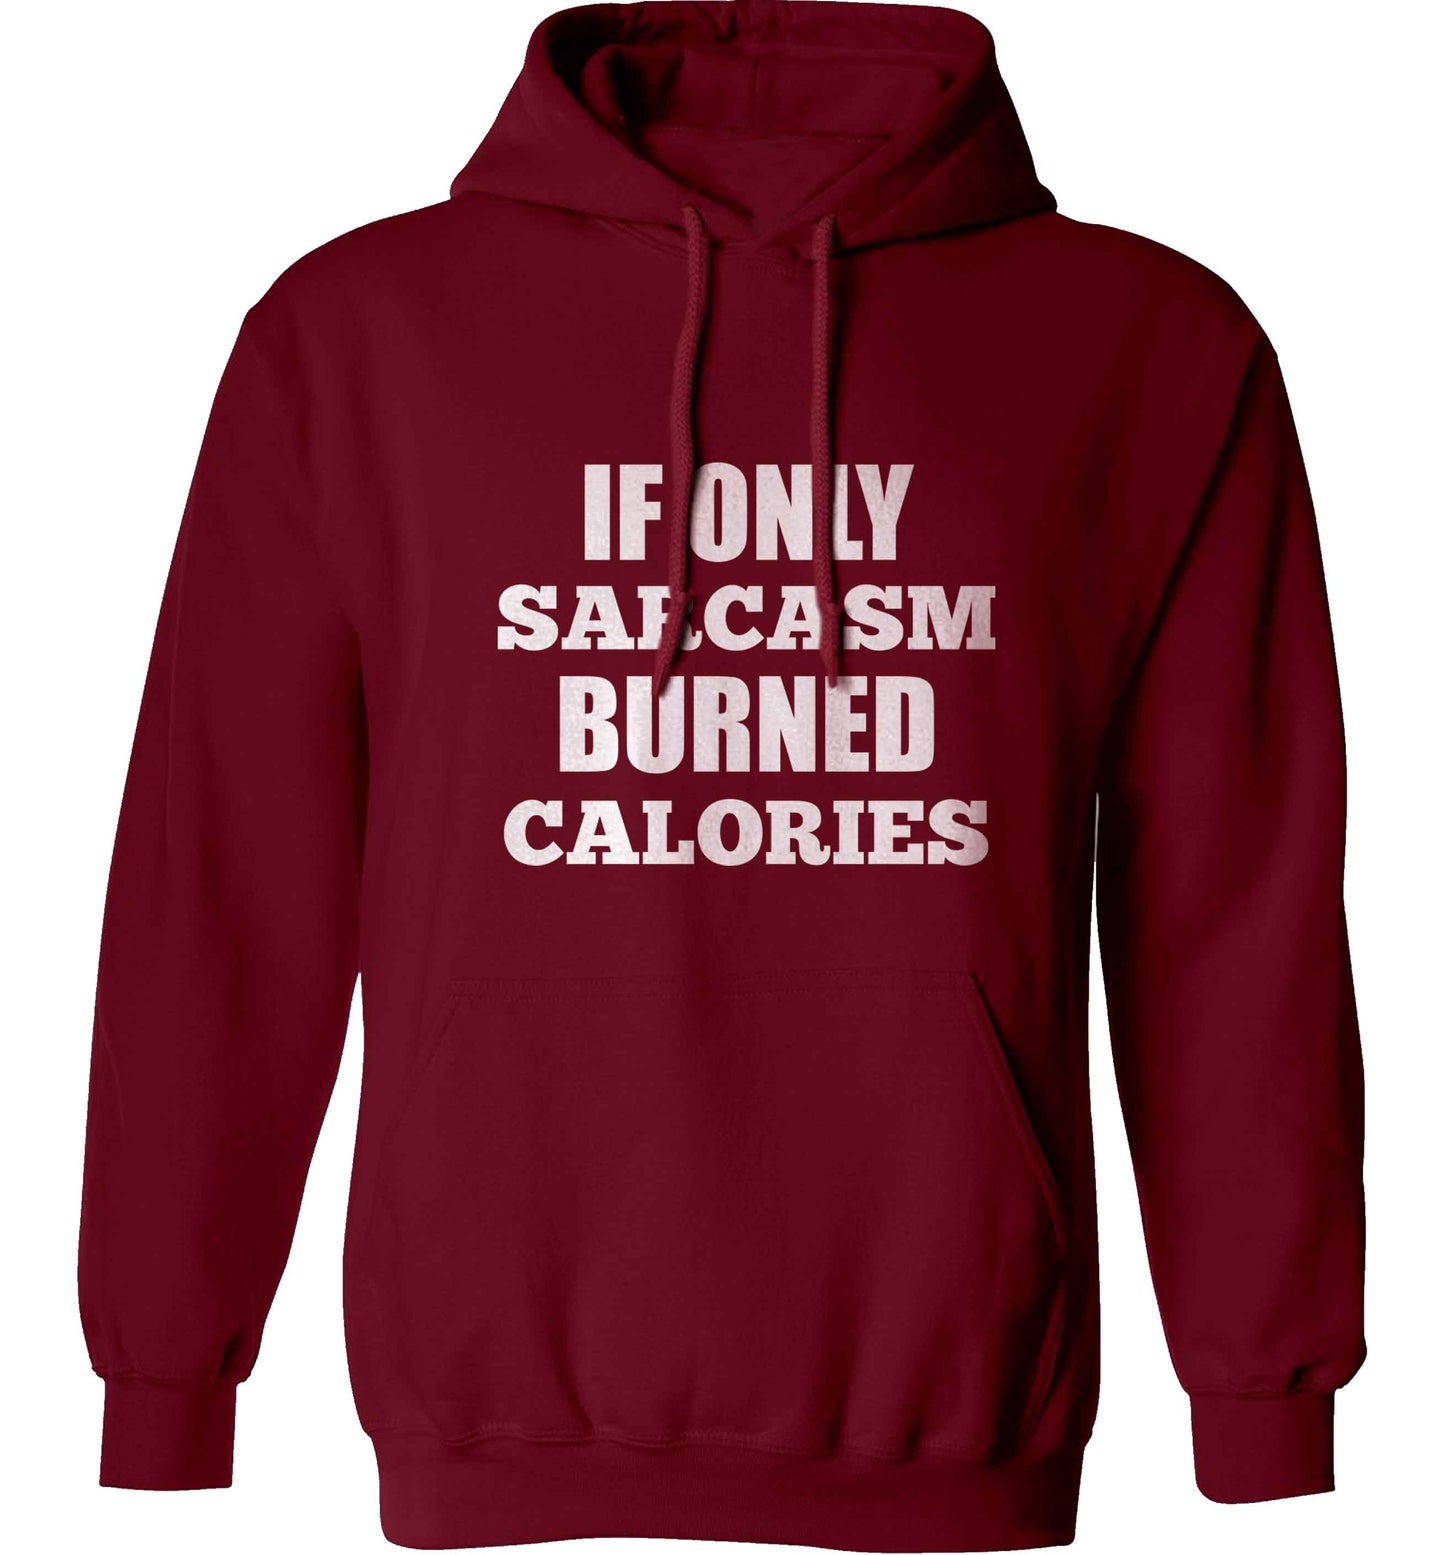 If only sarcasm burned calories adults unisex maroon hoodie 2XL